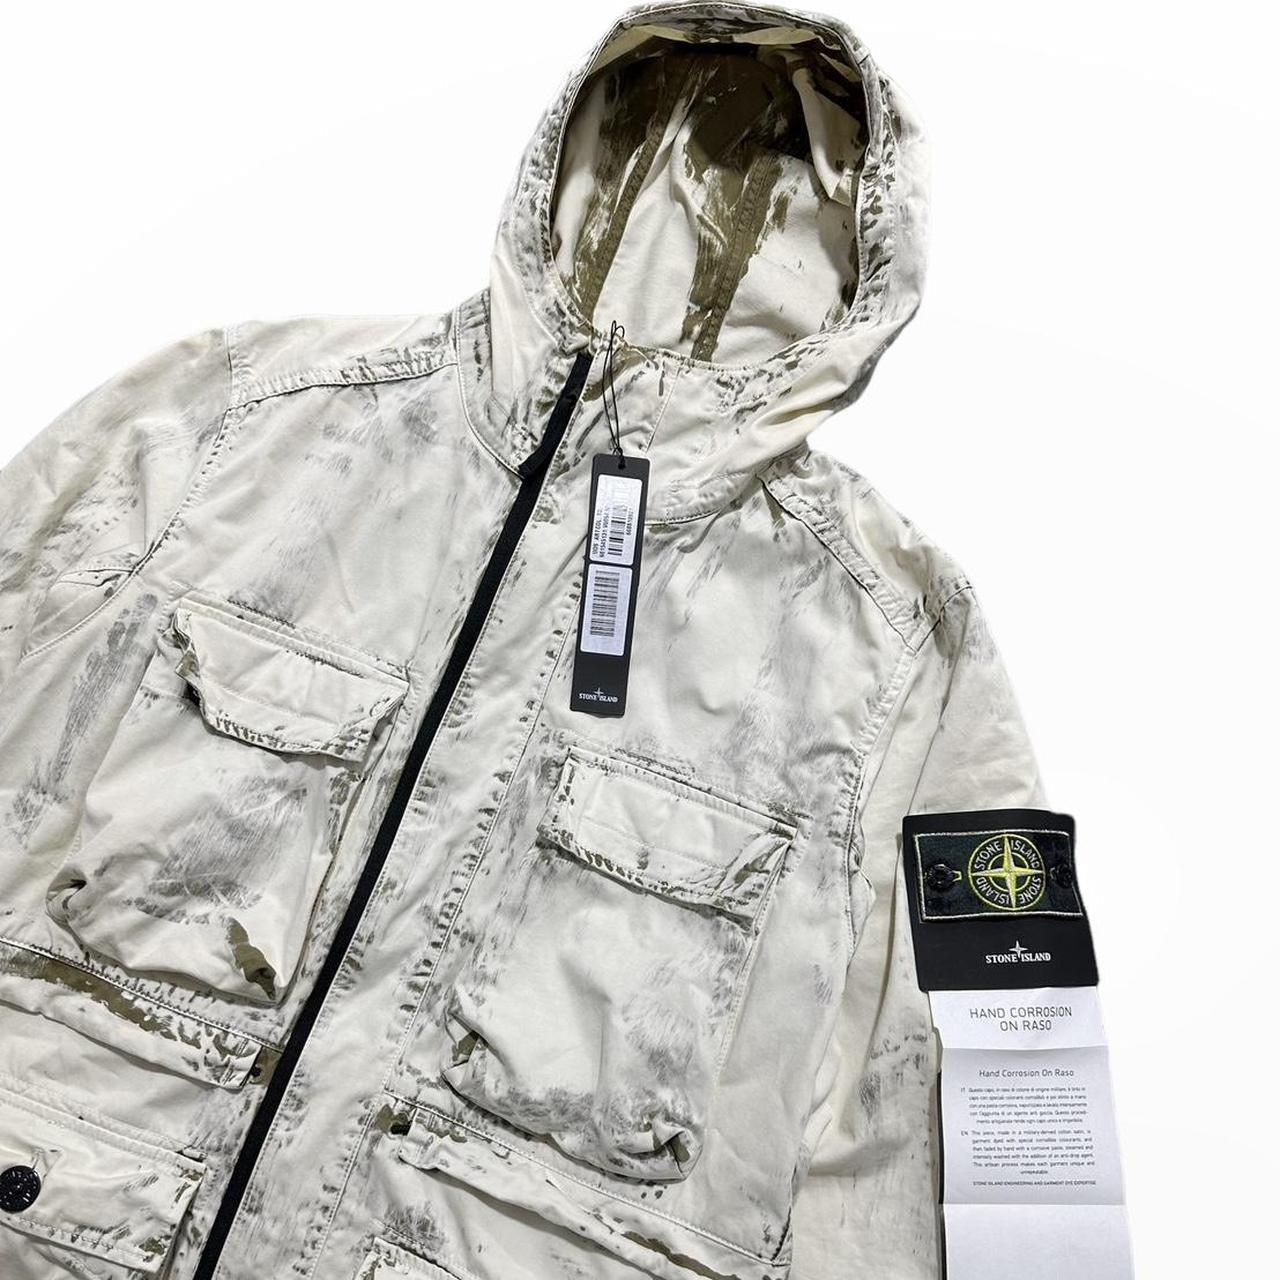 Stone Island S/S 2017 Hand Corrosion jacket - Known Source